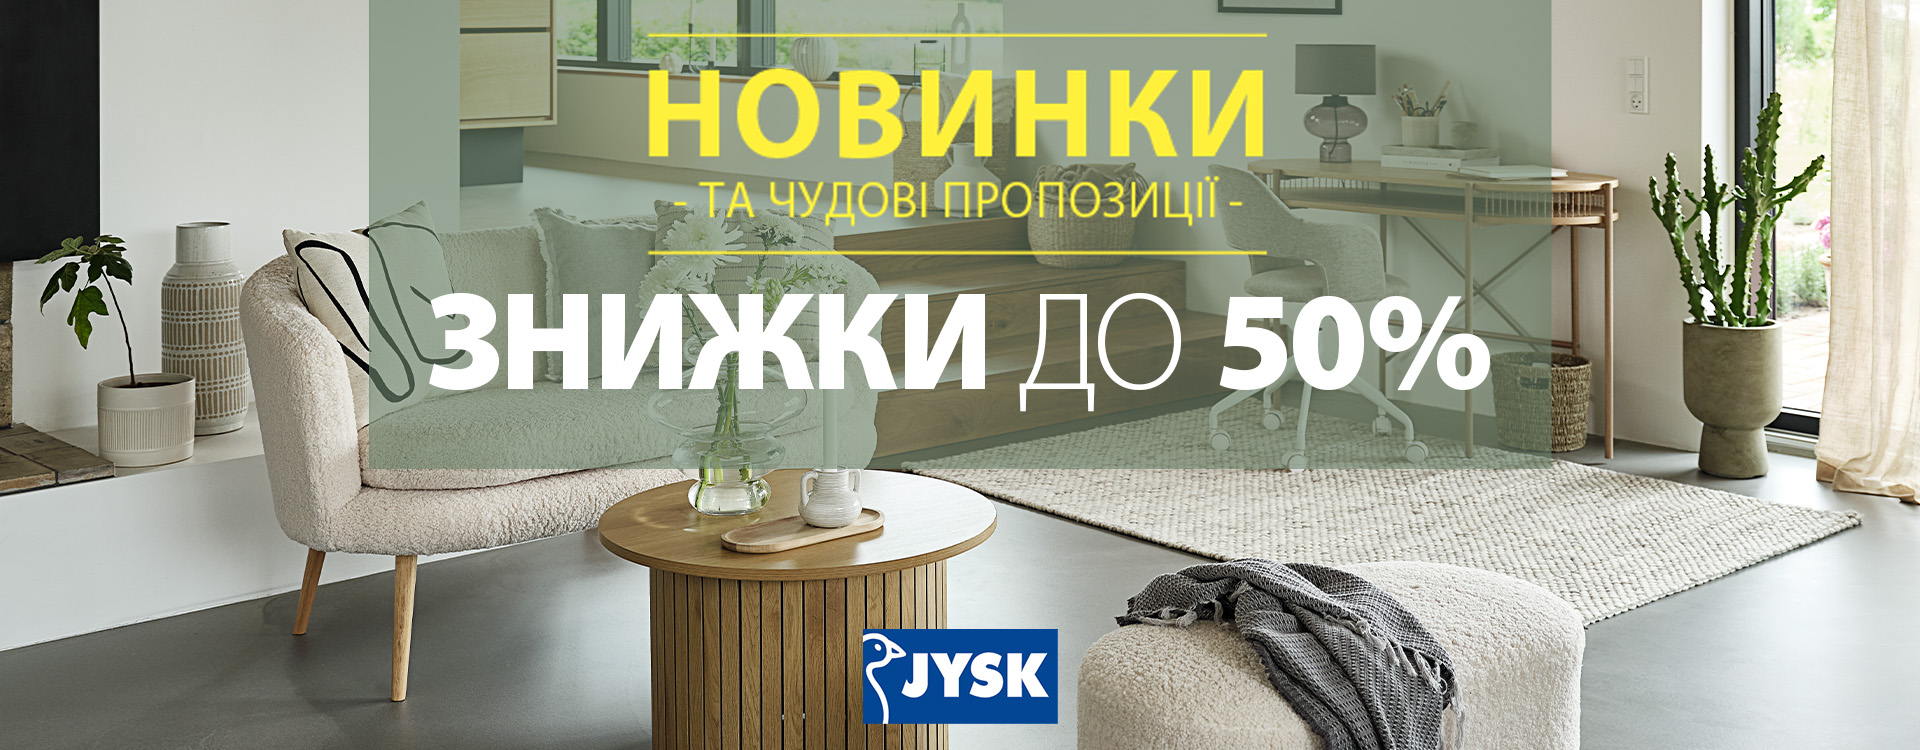 Discounts of up to 50% at JYSK